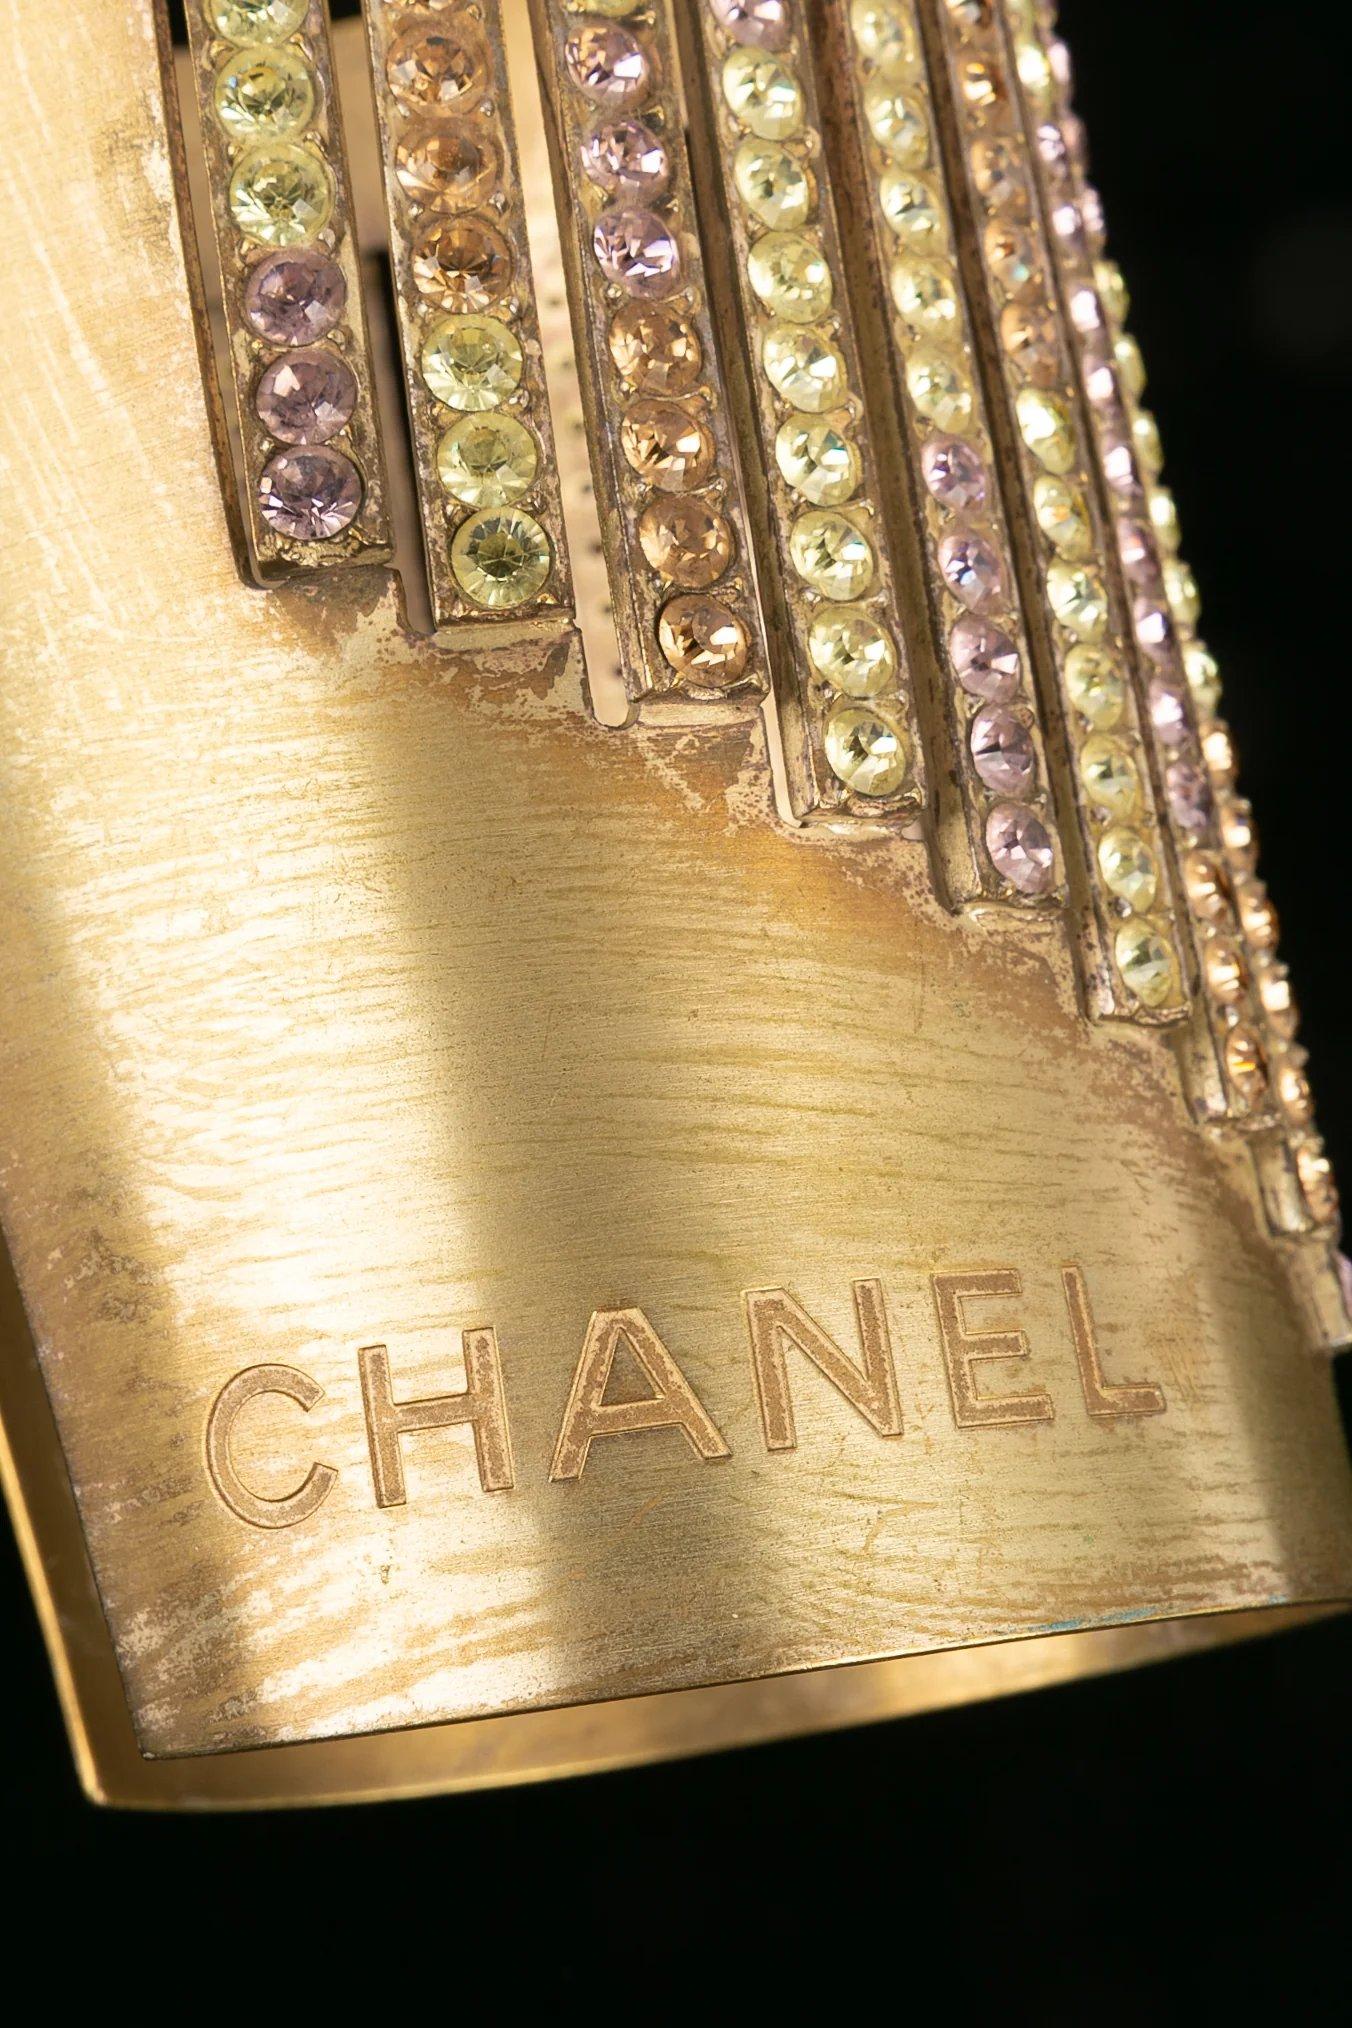 Chanel Cuff Bracelet in Golden Metal Sleeve Paved with Multicolored Rhinestones In Good Condition For Sale In SAINT-OUEN-SUR-SEINE, FR